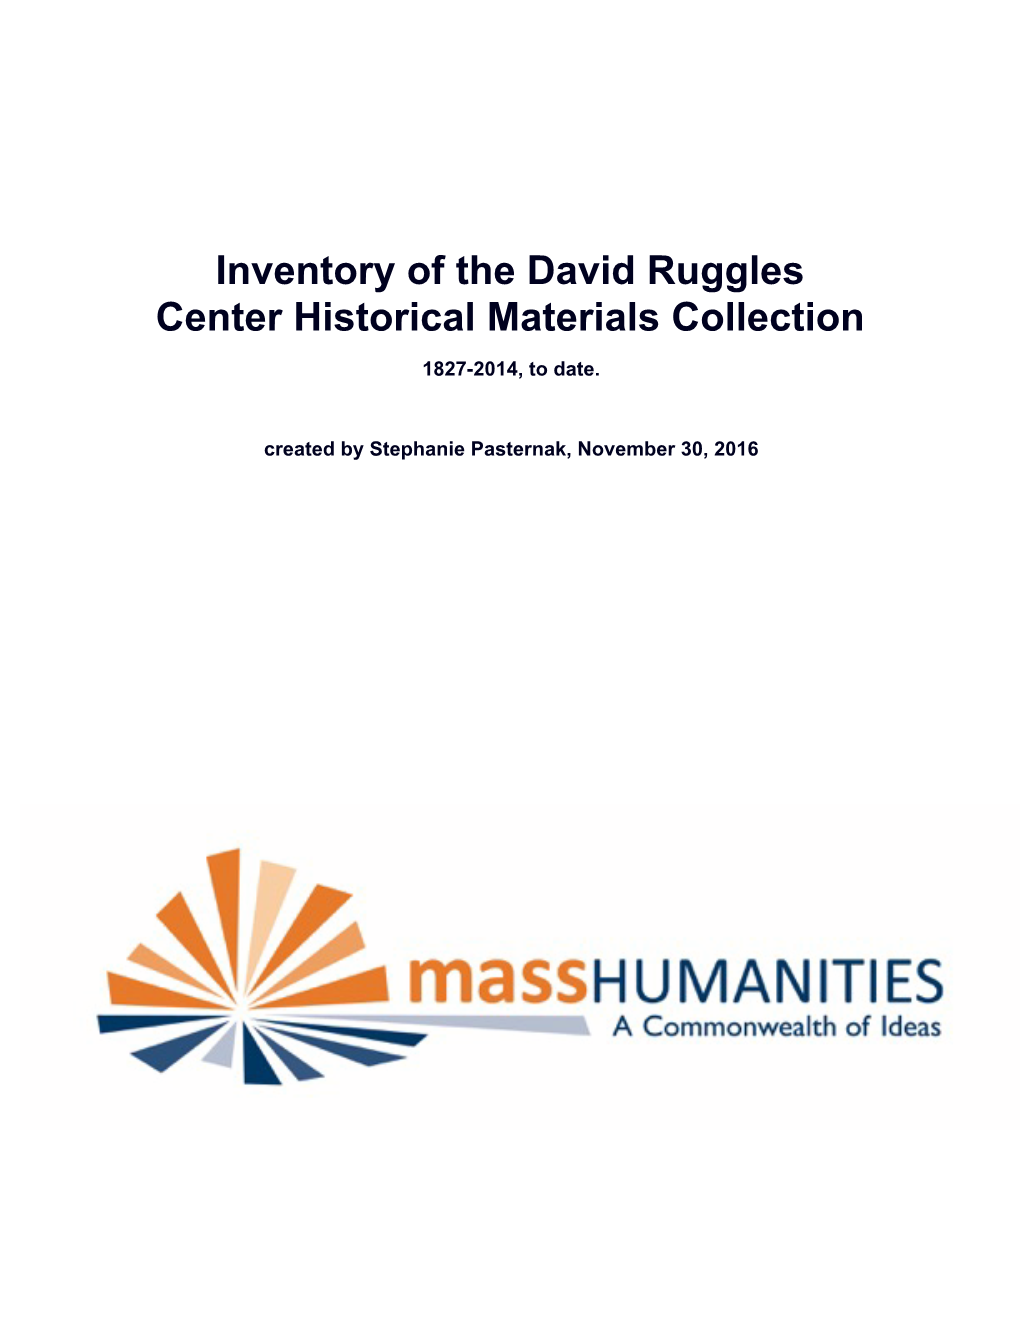 Inventory of David Ruggles Center Historical Materials Collection